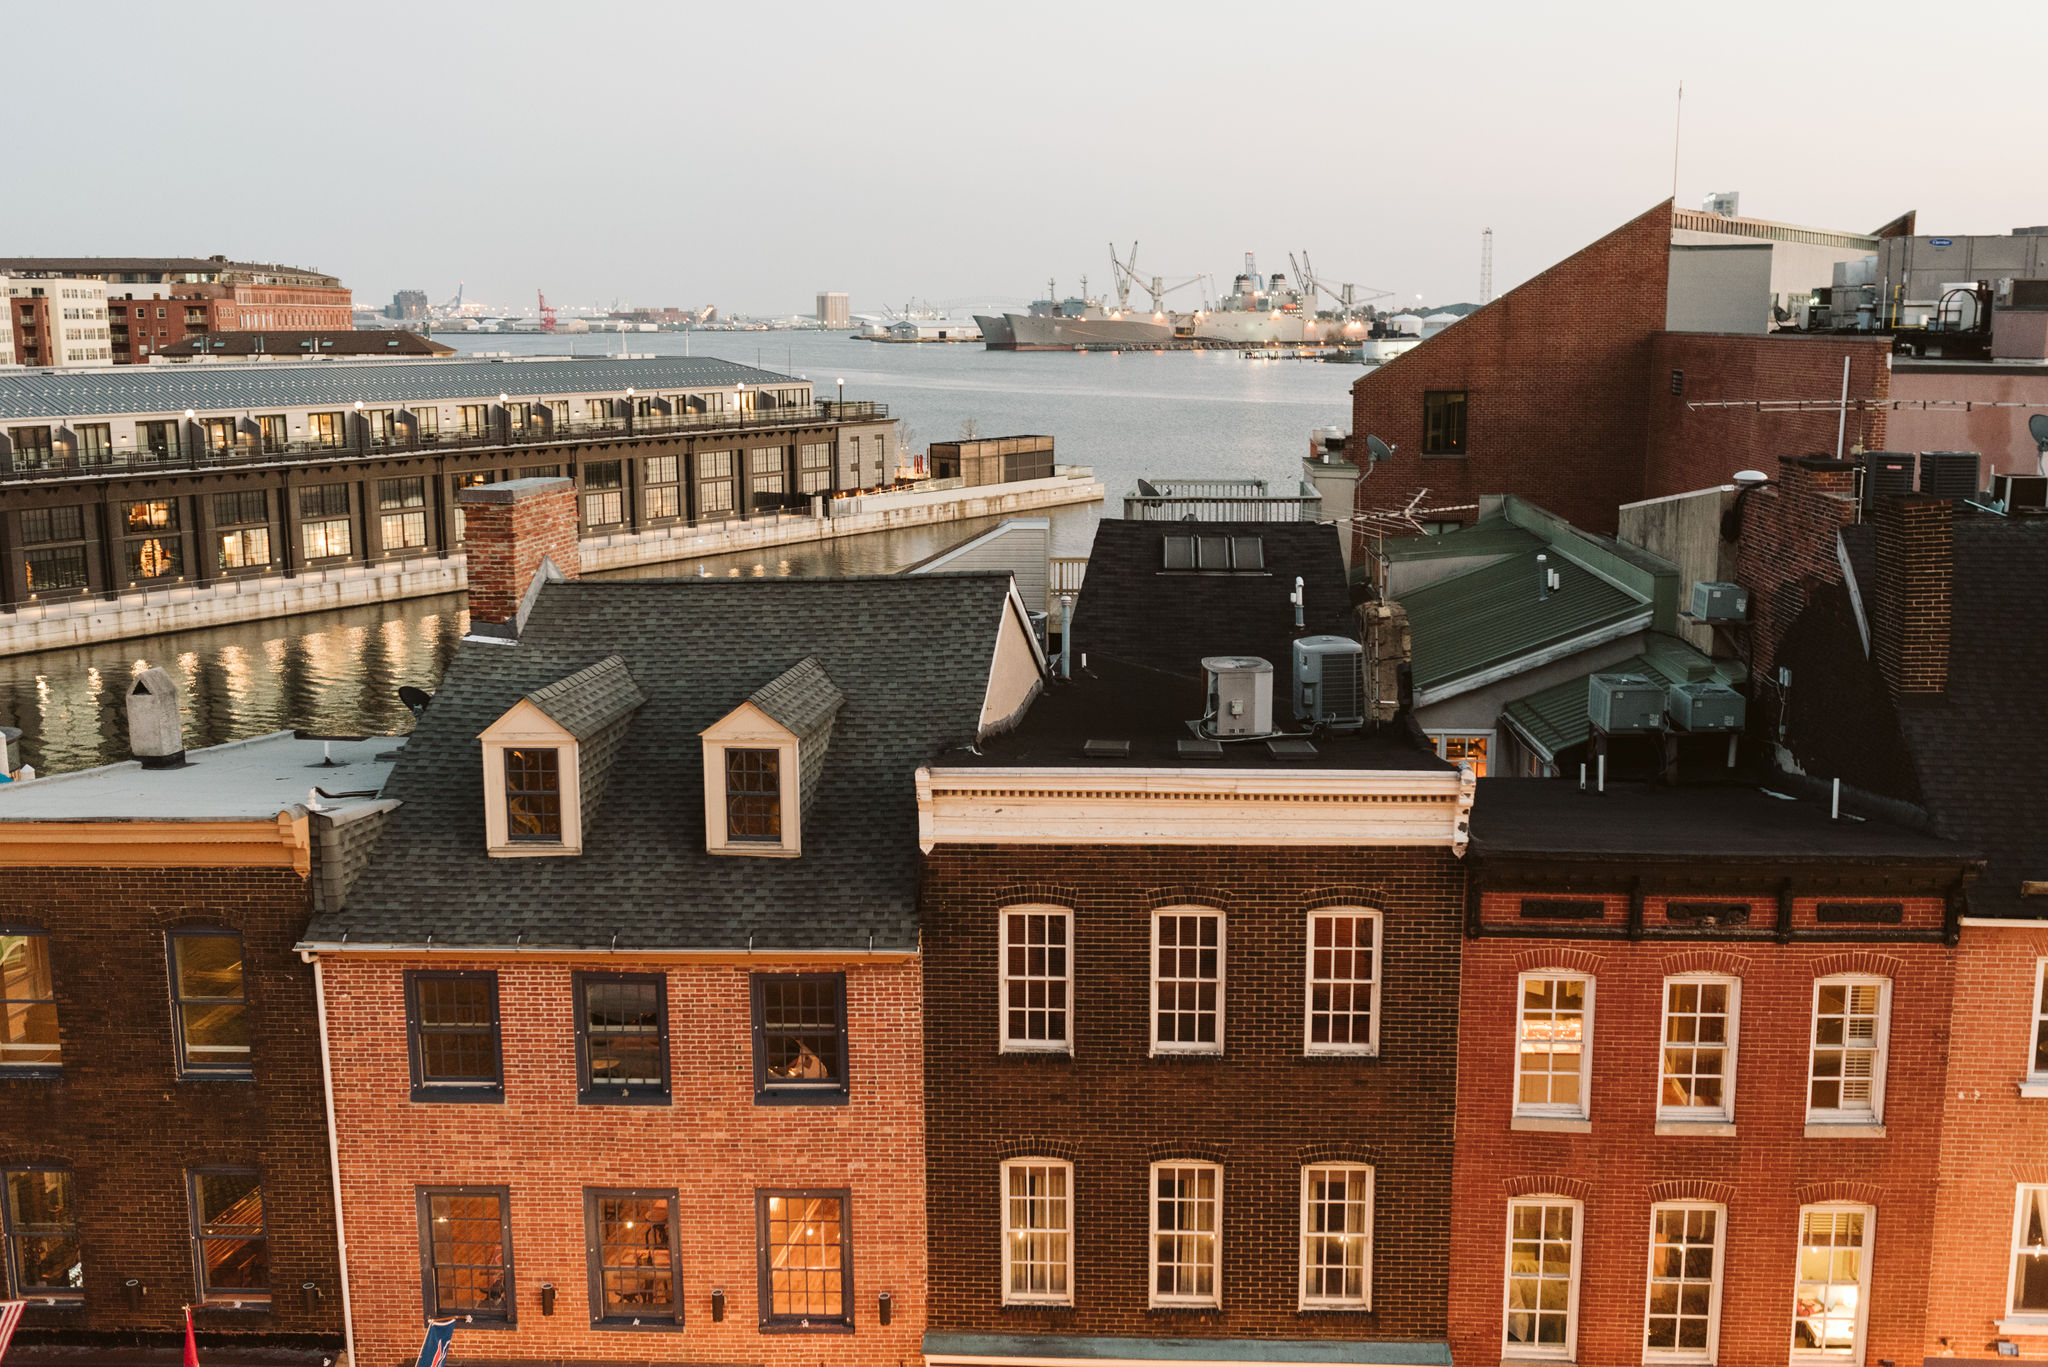  Baltimore, Fells Point, Maryland Wedding Photographer, Winter Wedding, Historic, Classic, Vintage, City Rooftop with Inner Harbor and Ships in the Background 